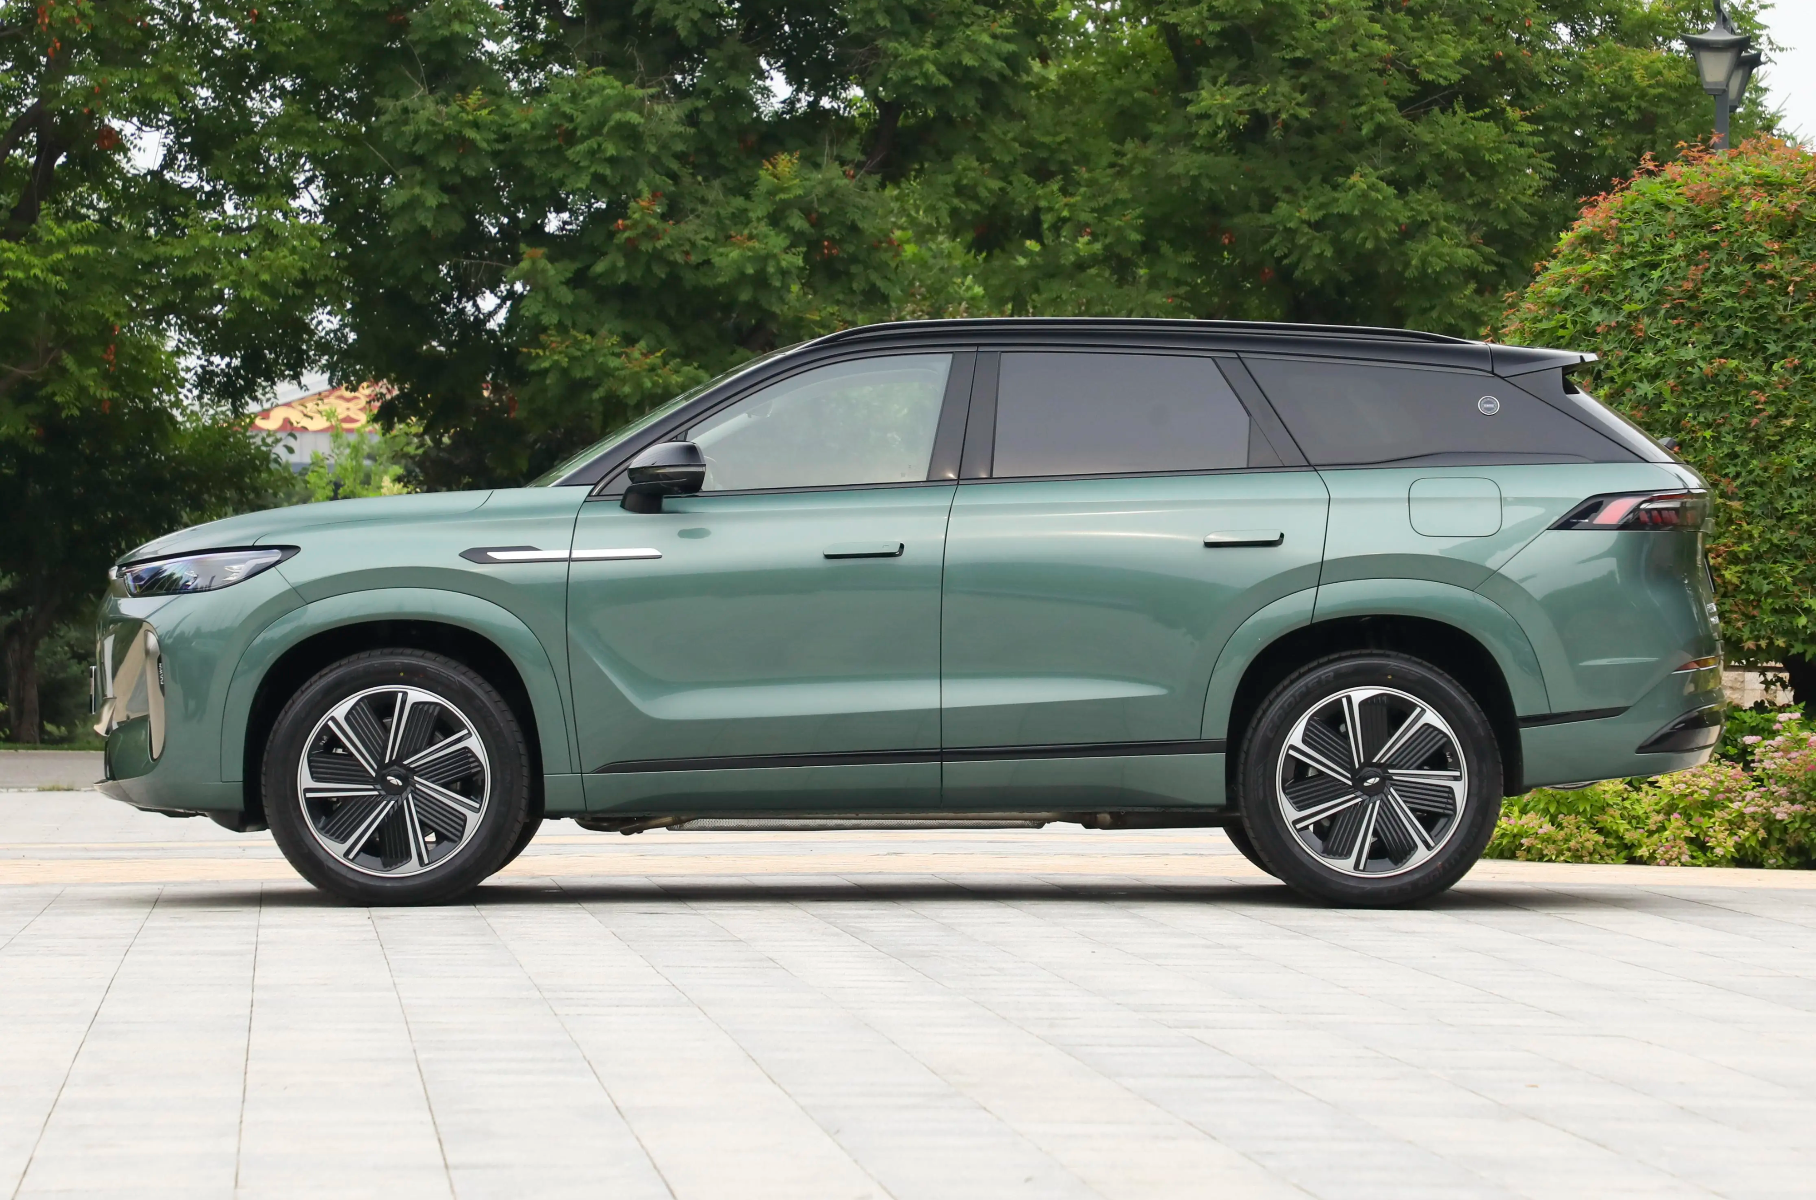 Chery announced the start date for sales of the Fulwin 10 crossover